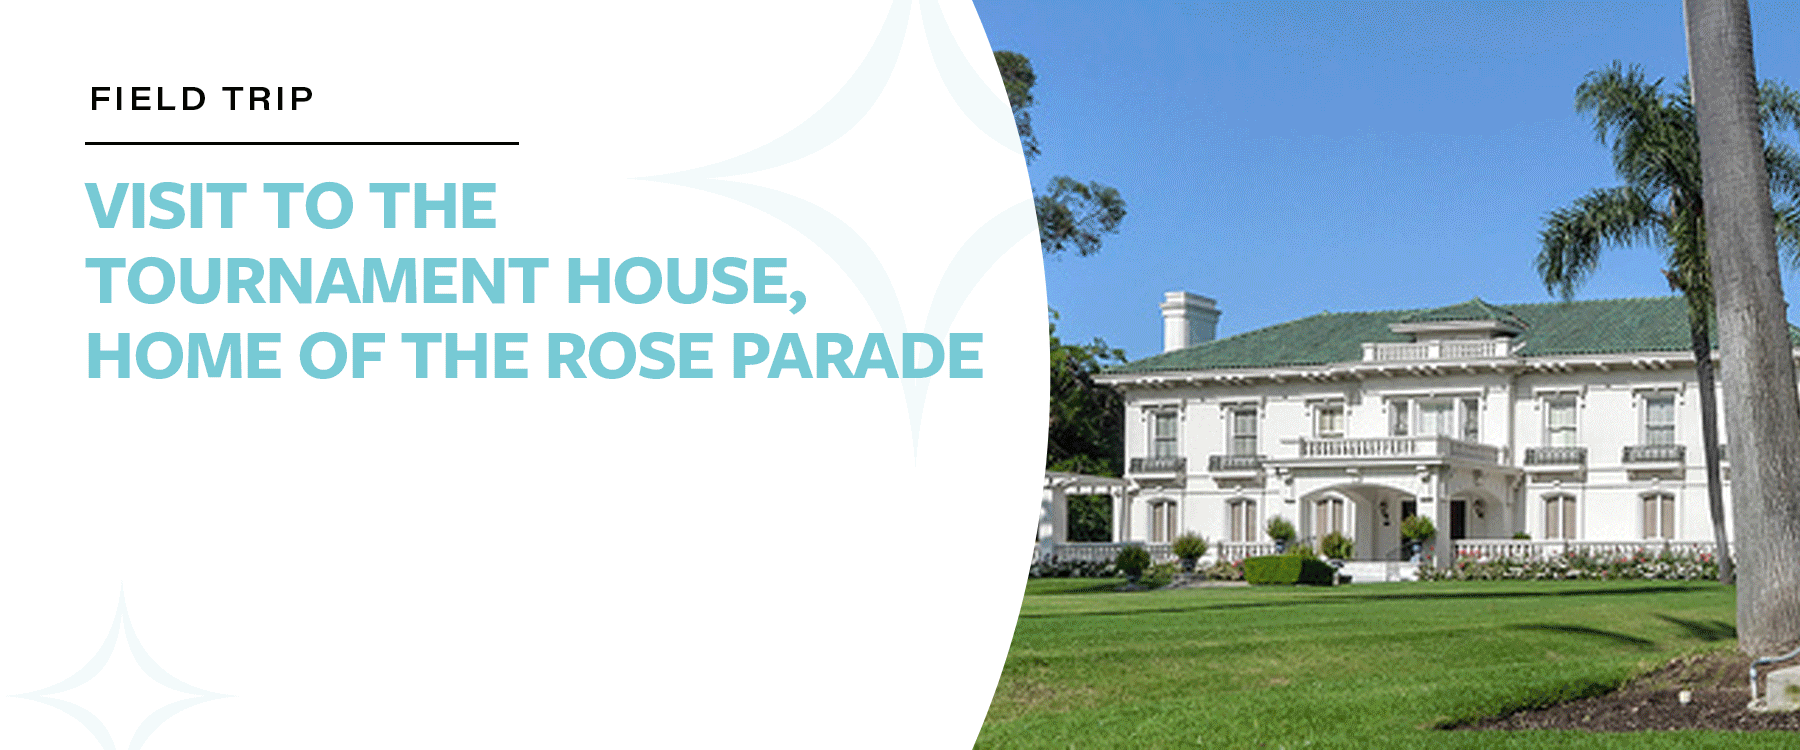 Field trip: Visit to Tournament House, Home of the Rose Parade